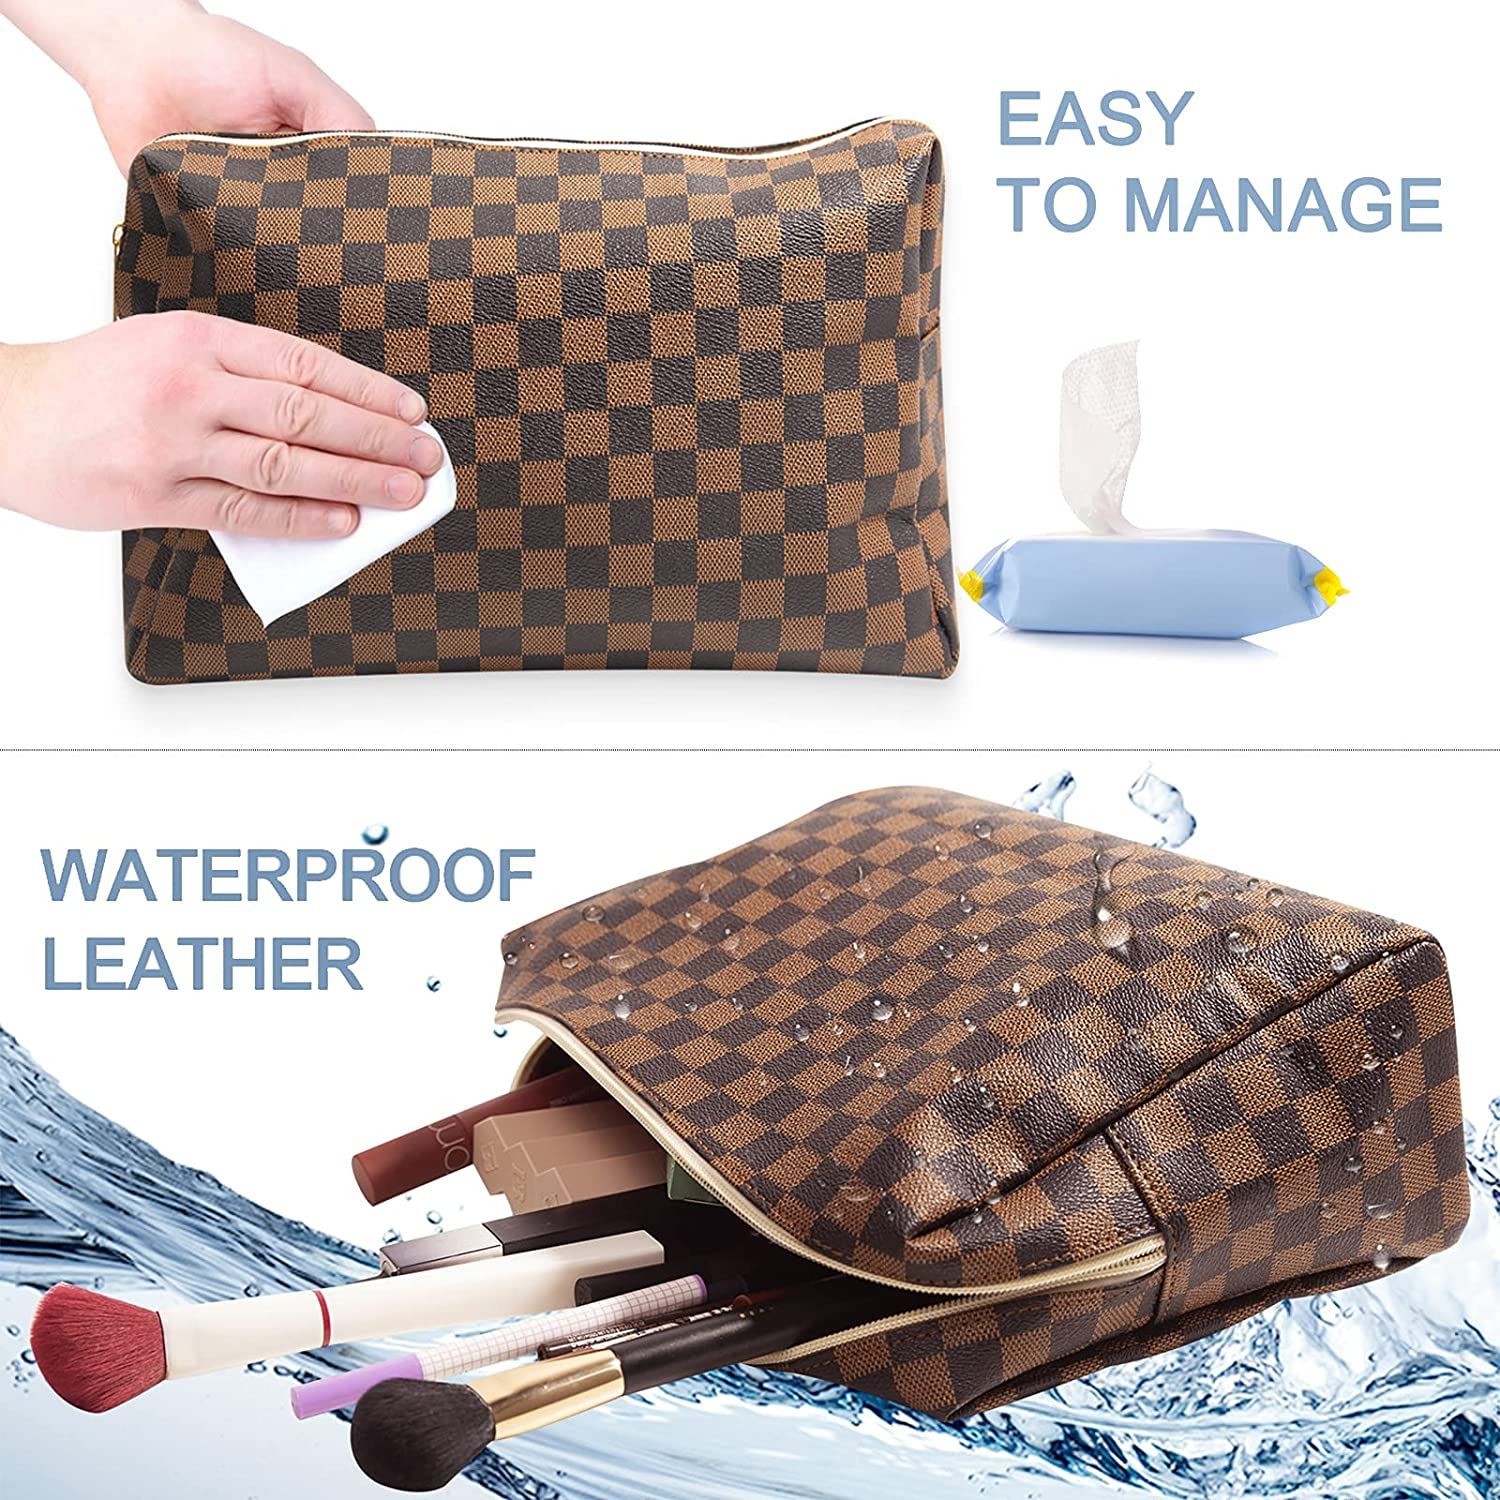 Gogad Checkered Travel Makeup Bag, Vegan Leather Large Retro Cosmetic Pouch, Toiletry Bag for Women, Portable and Waterproof, Brown, Size: Large*W*H=11.8*5*